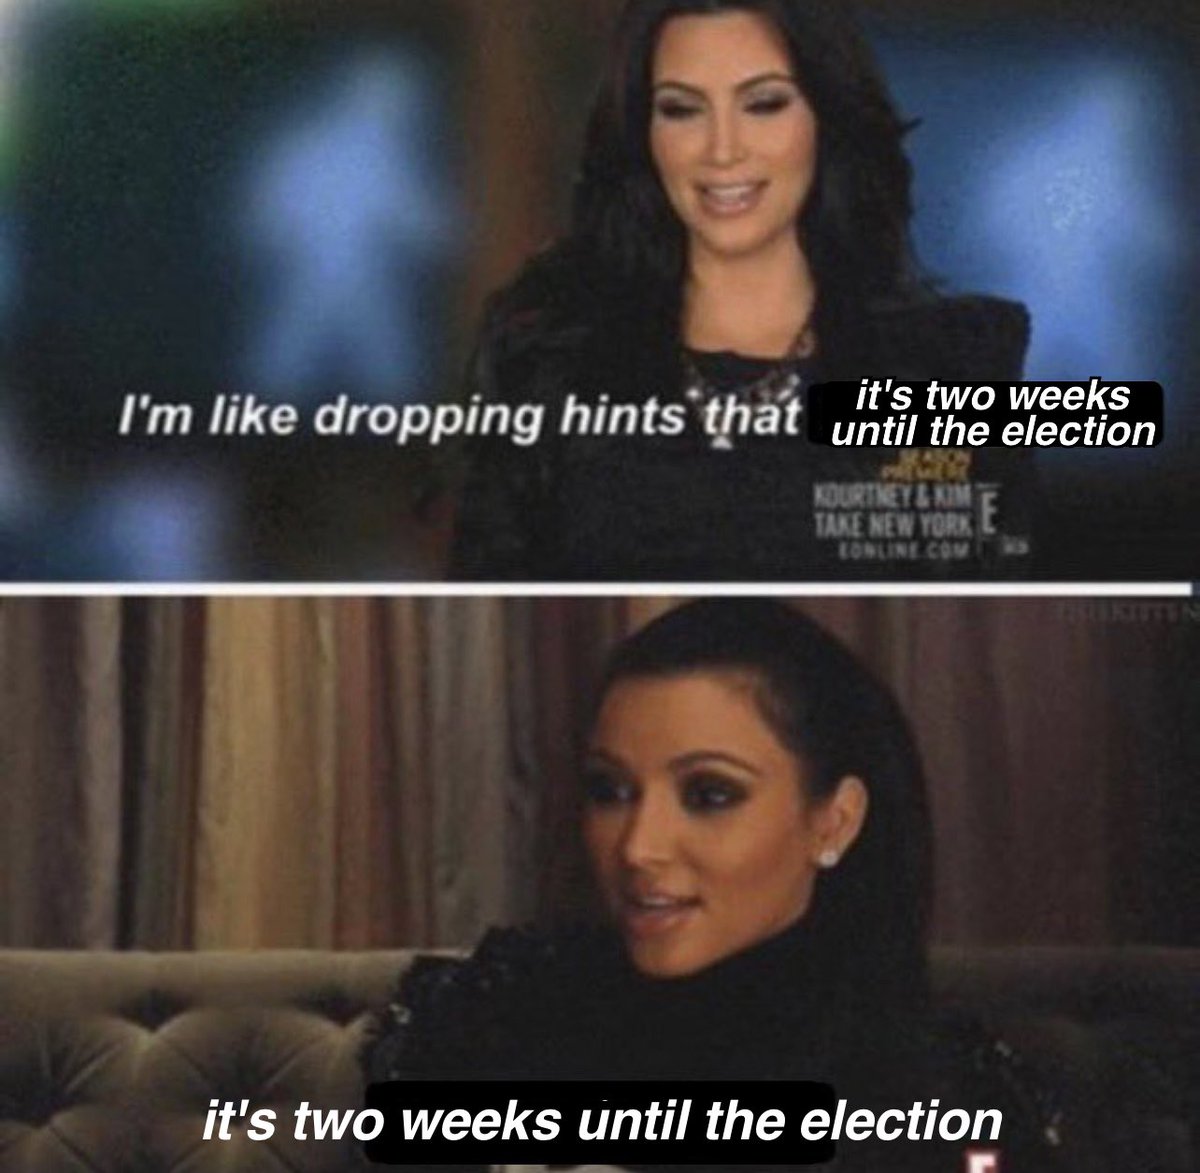 (it’s two weeks until the election)